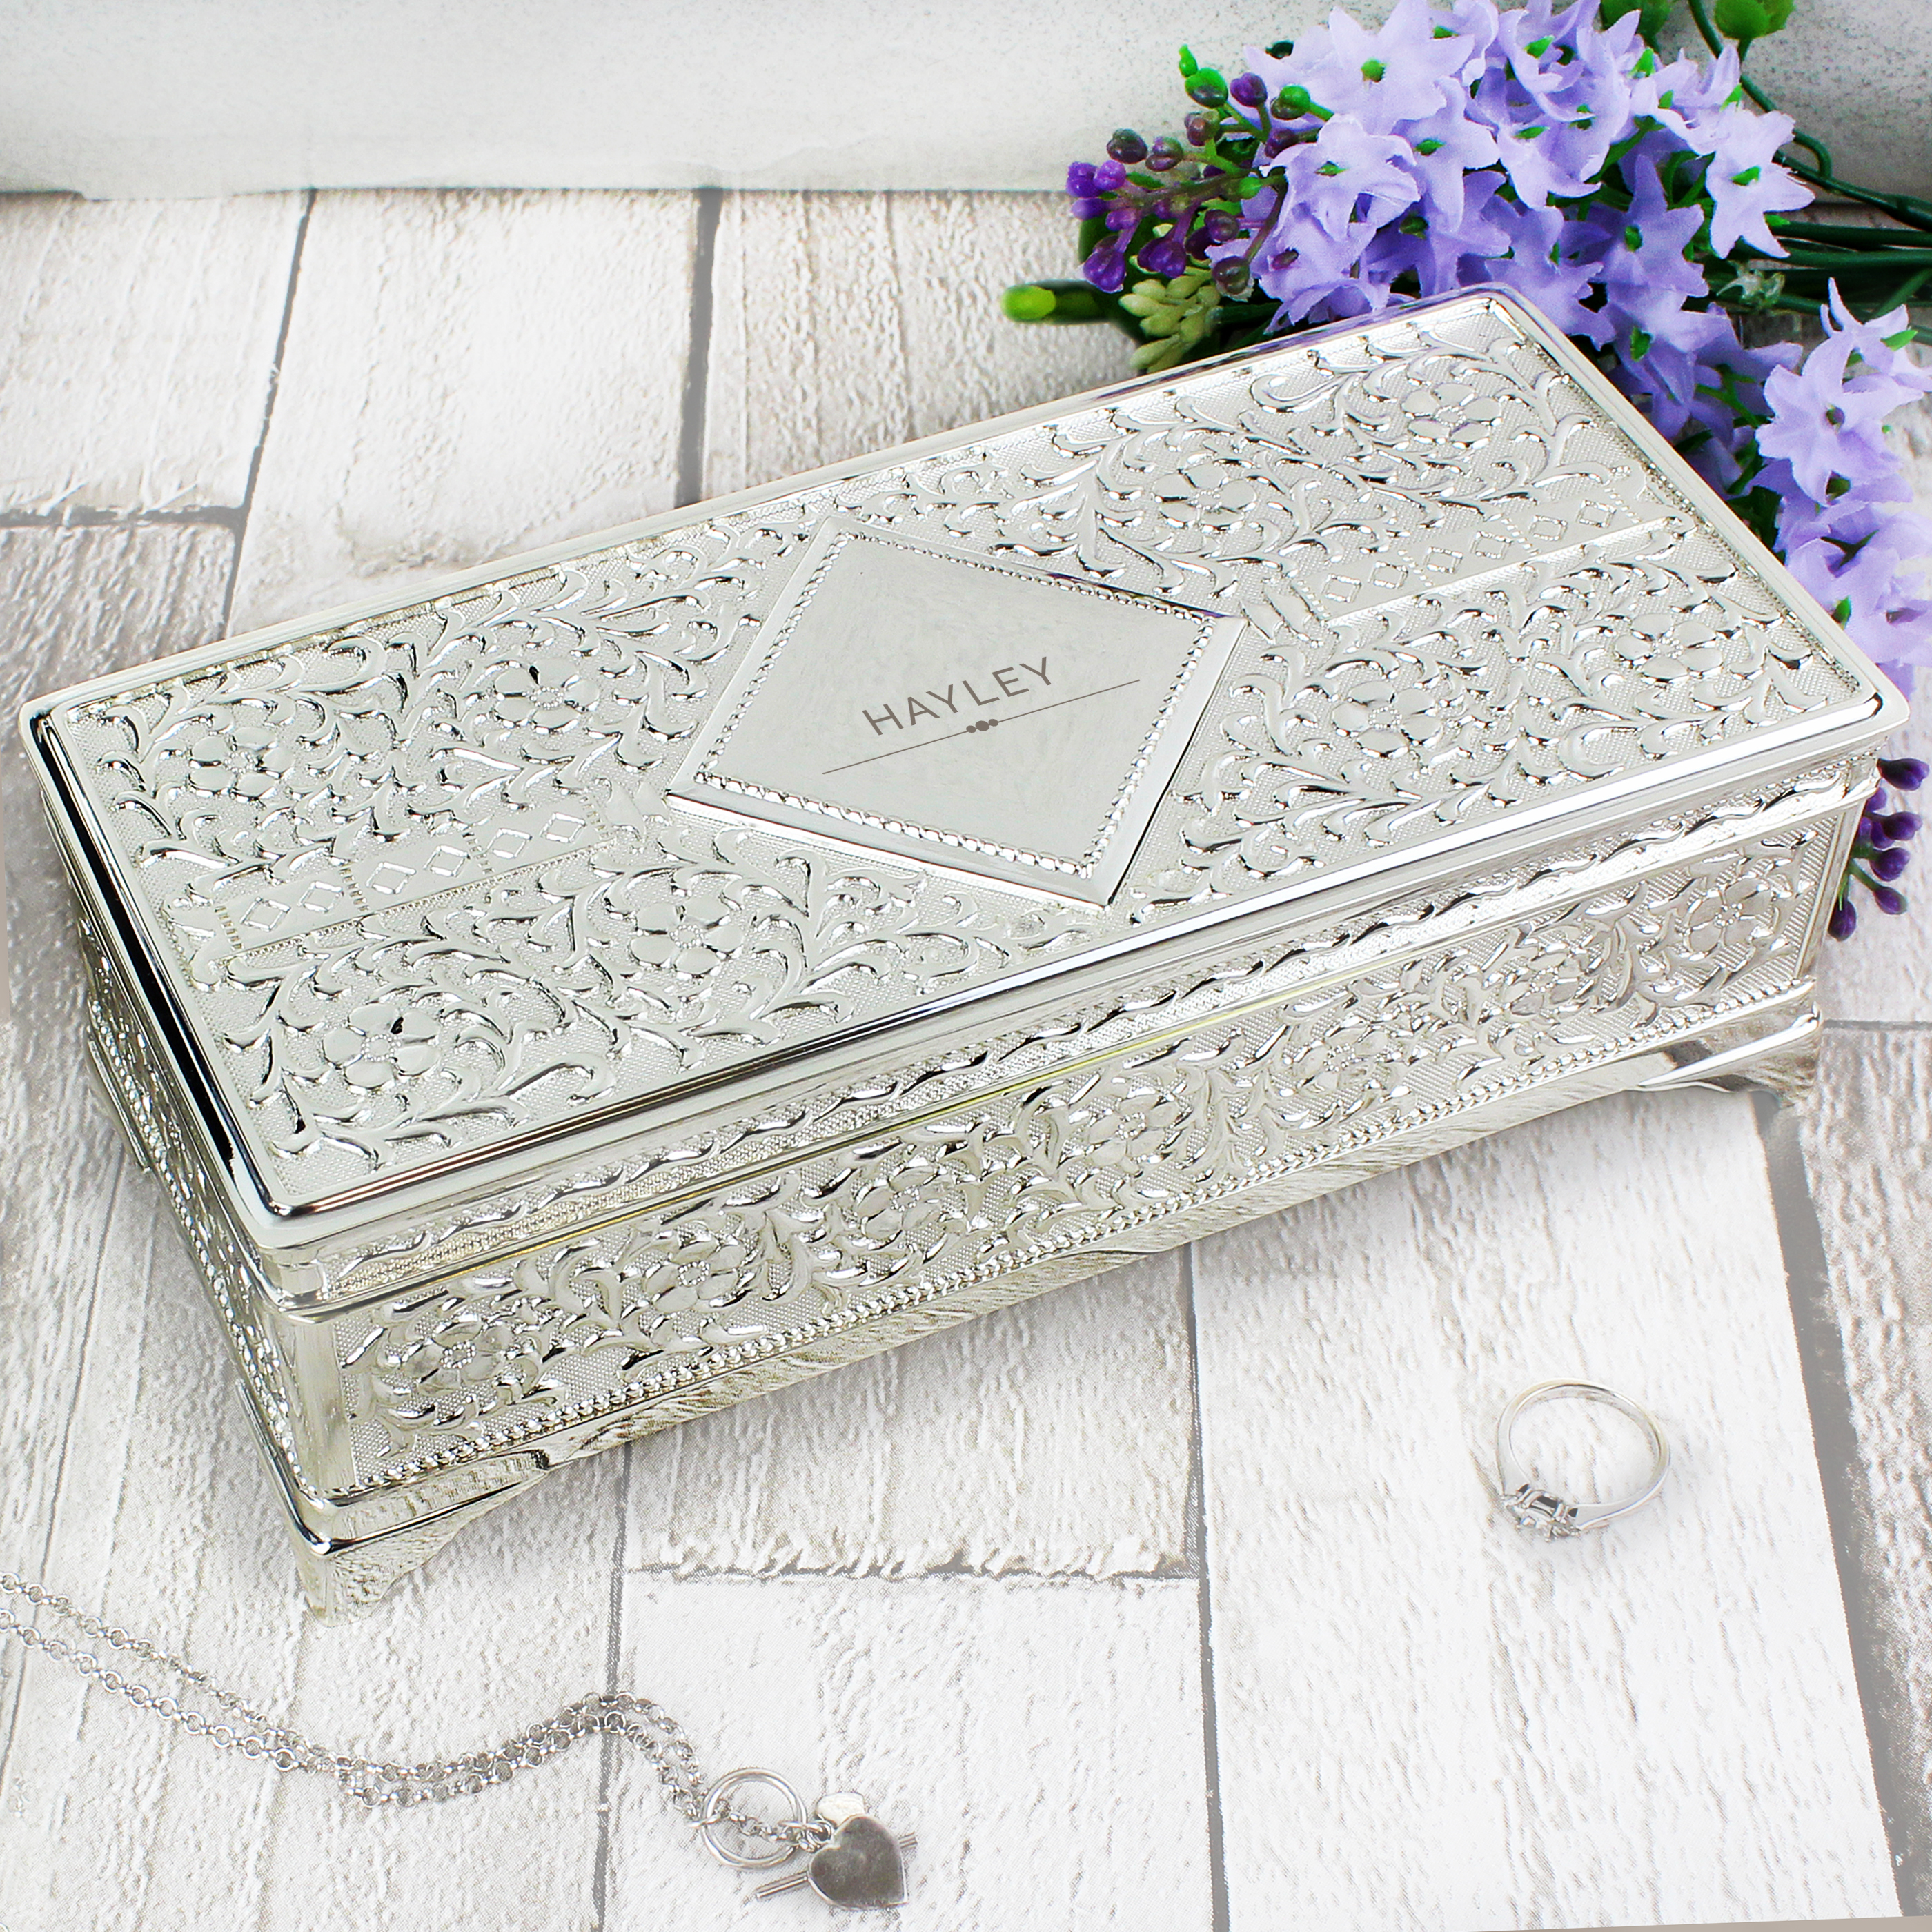 Personalised Antique Style Silver Plated Jewellery Box